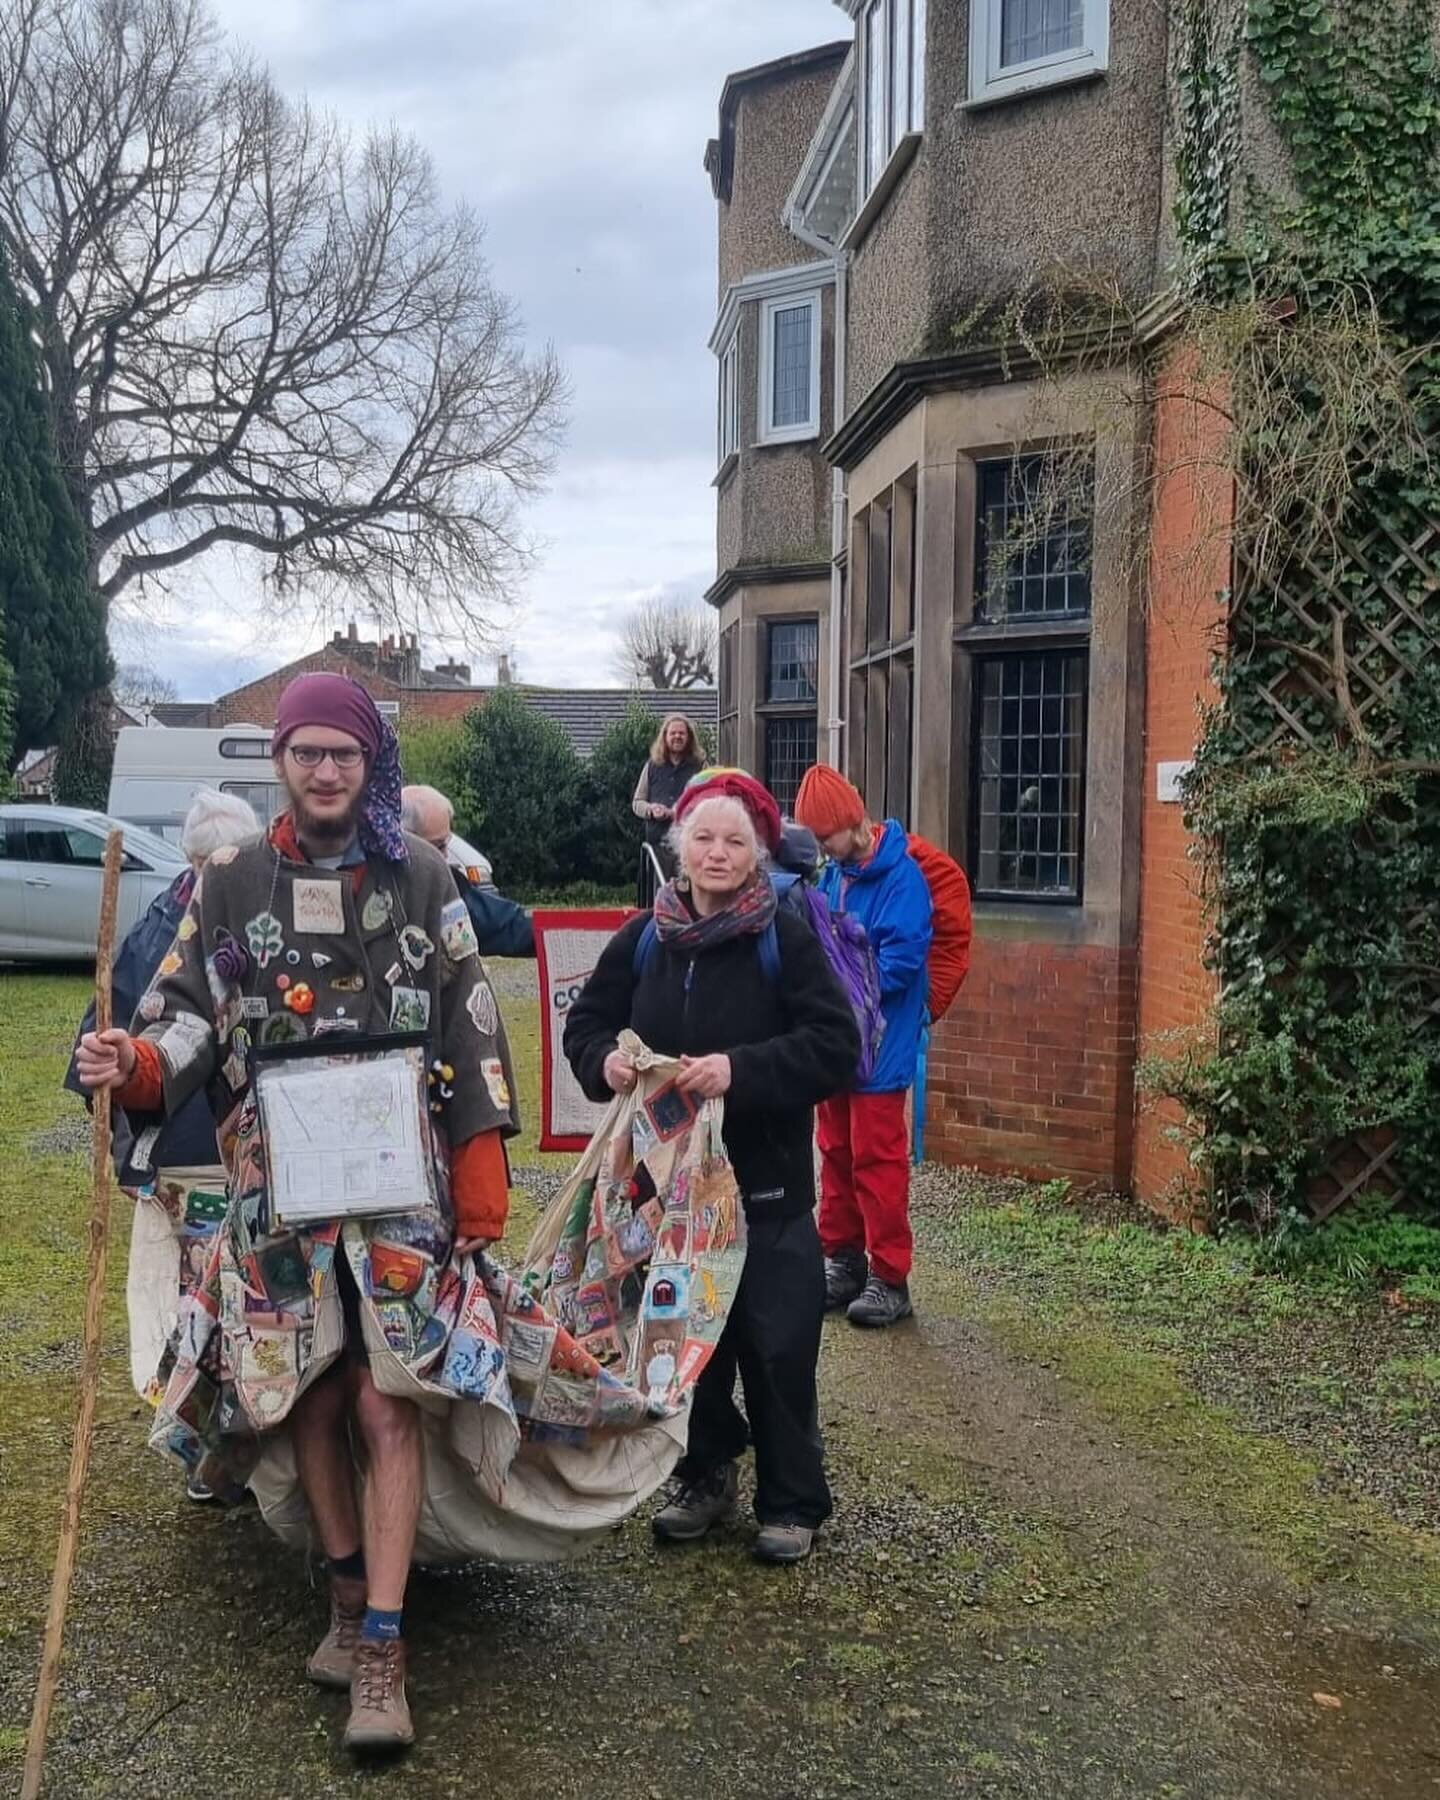 The Coat of Hopes is currently on the last walk of this leg to York&hellip;Starting out yesterday from Thirsk, onward to Easingwold and then to Shipton this afternoon. Tomorrow Sunday  7th April, the Coat of Hopes will be arriving in York around 2pm 